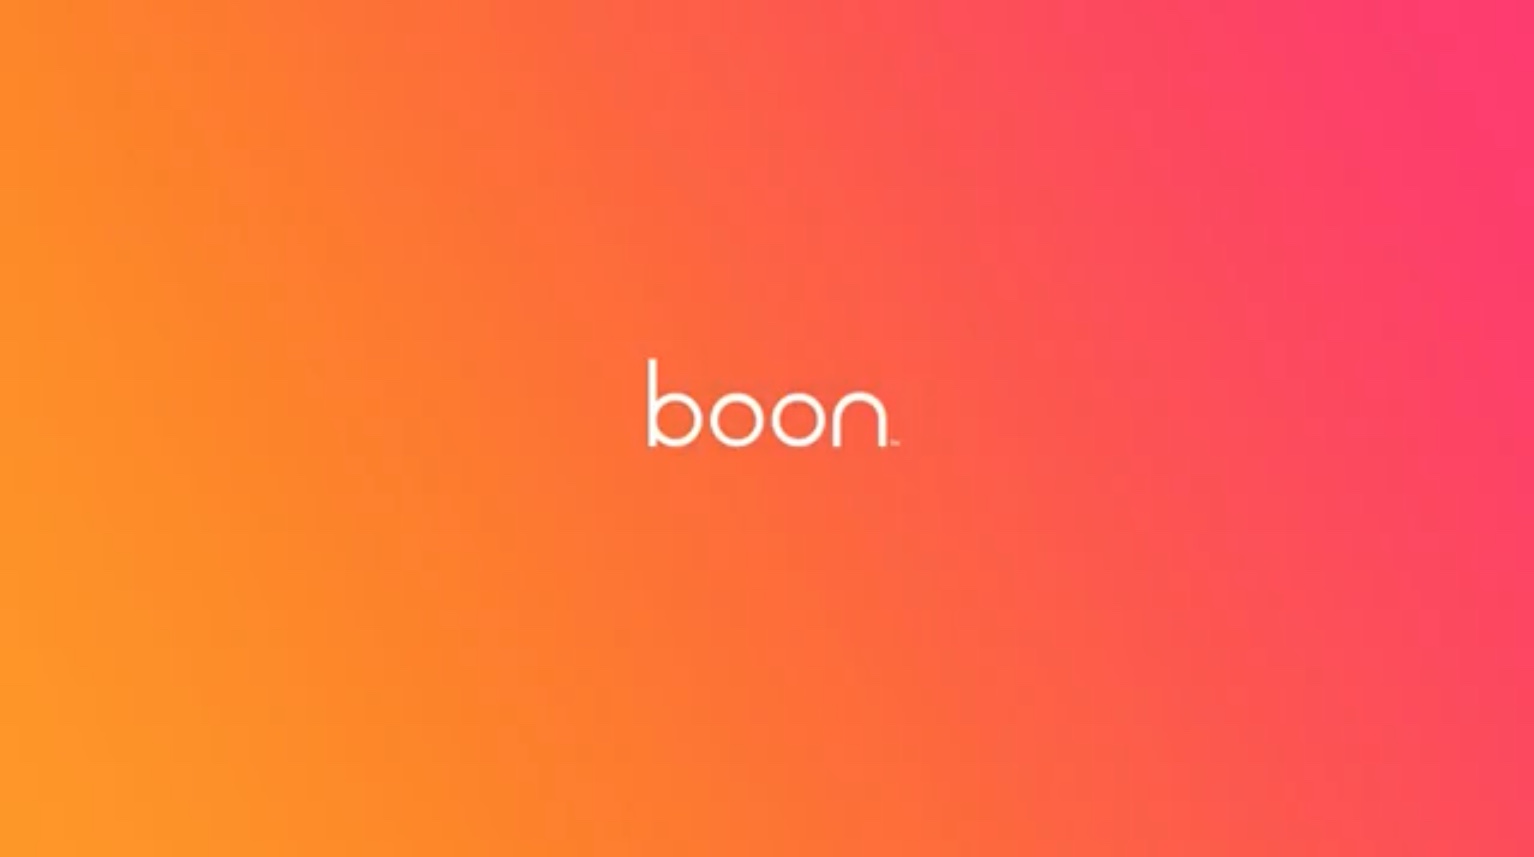 Boon is changing the healthcare industry!